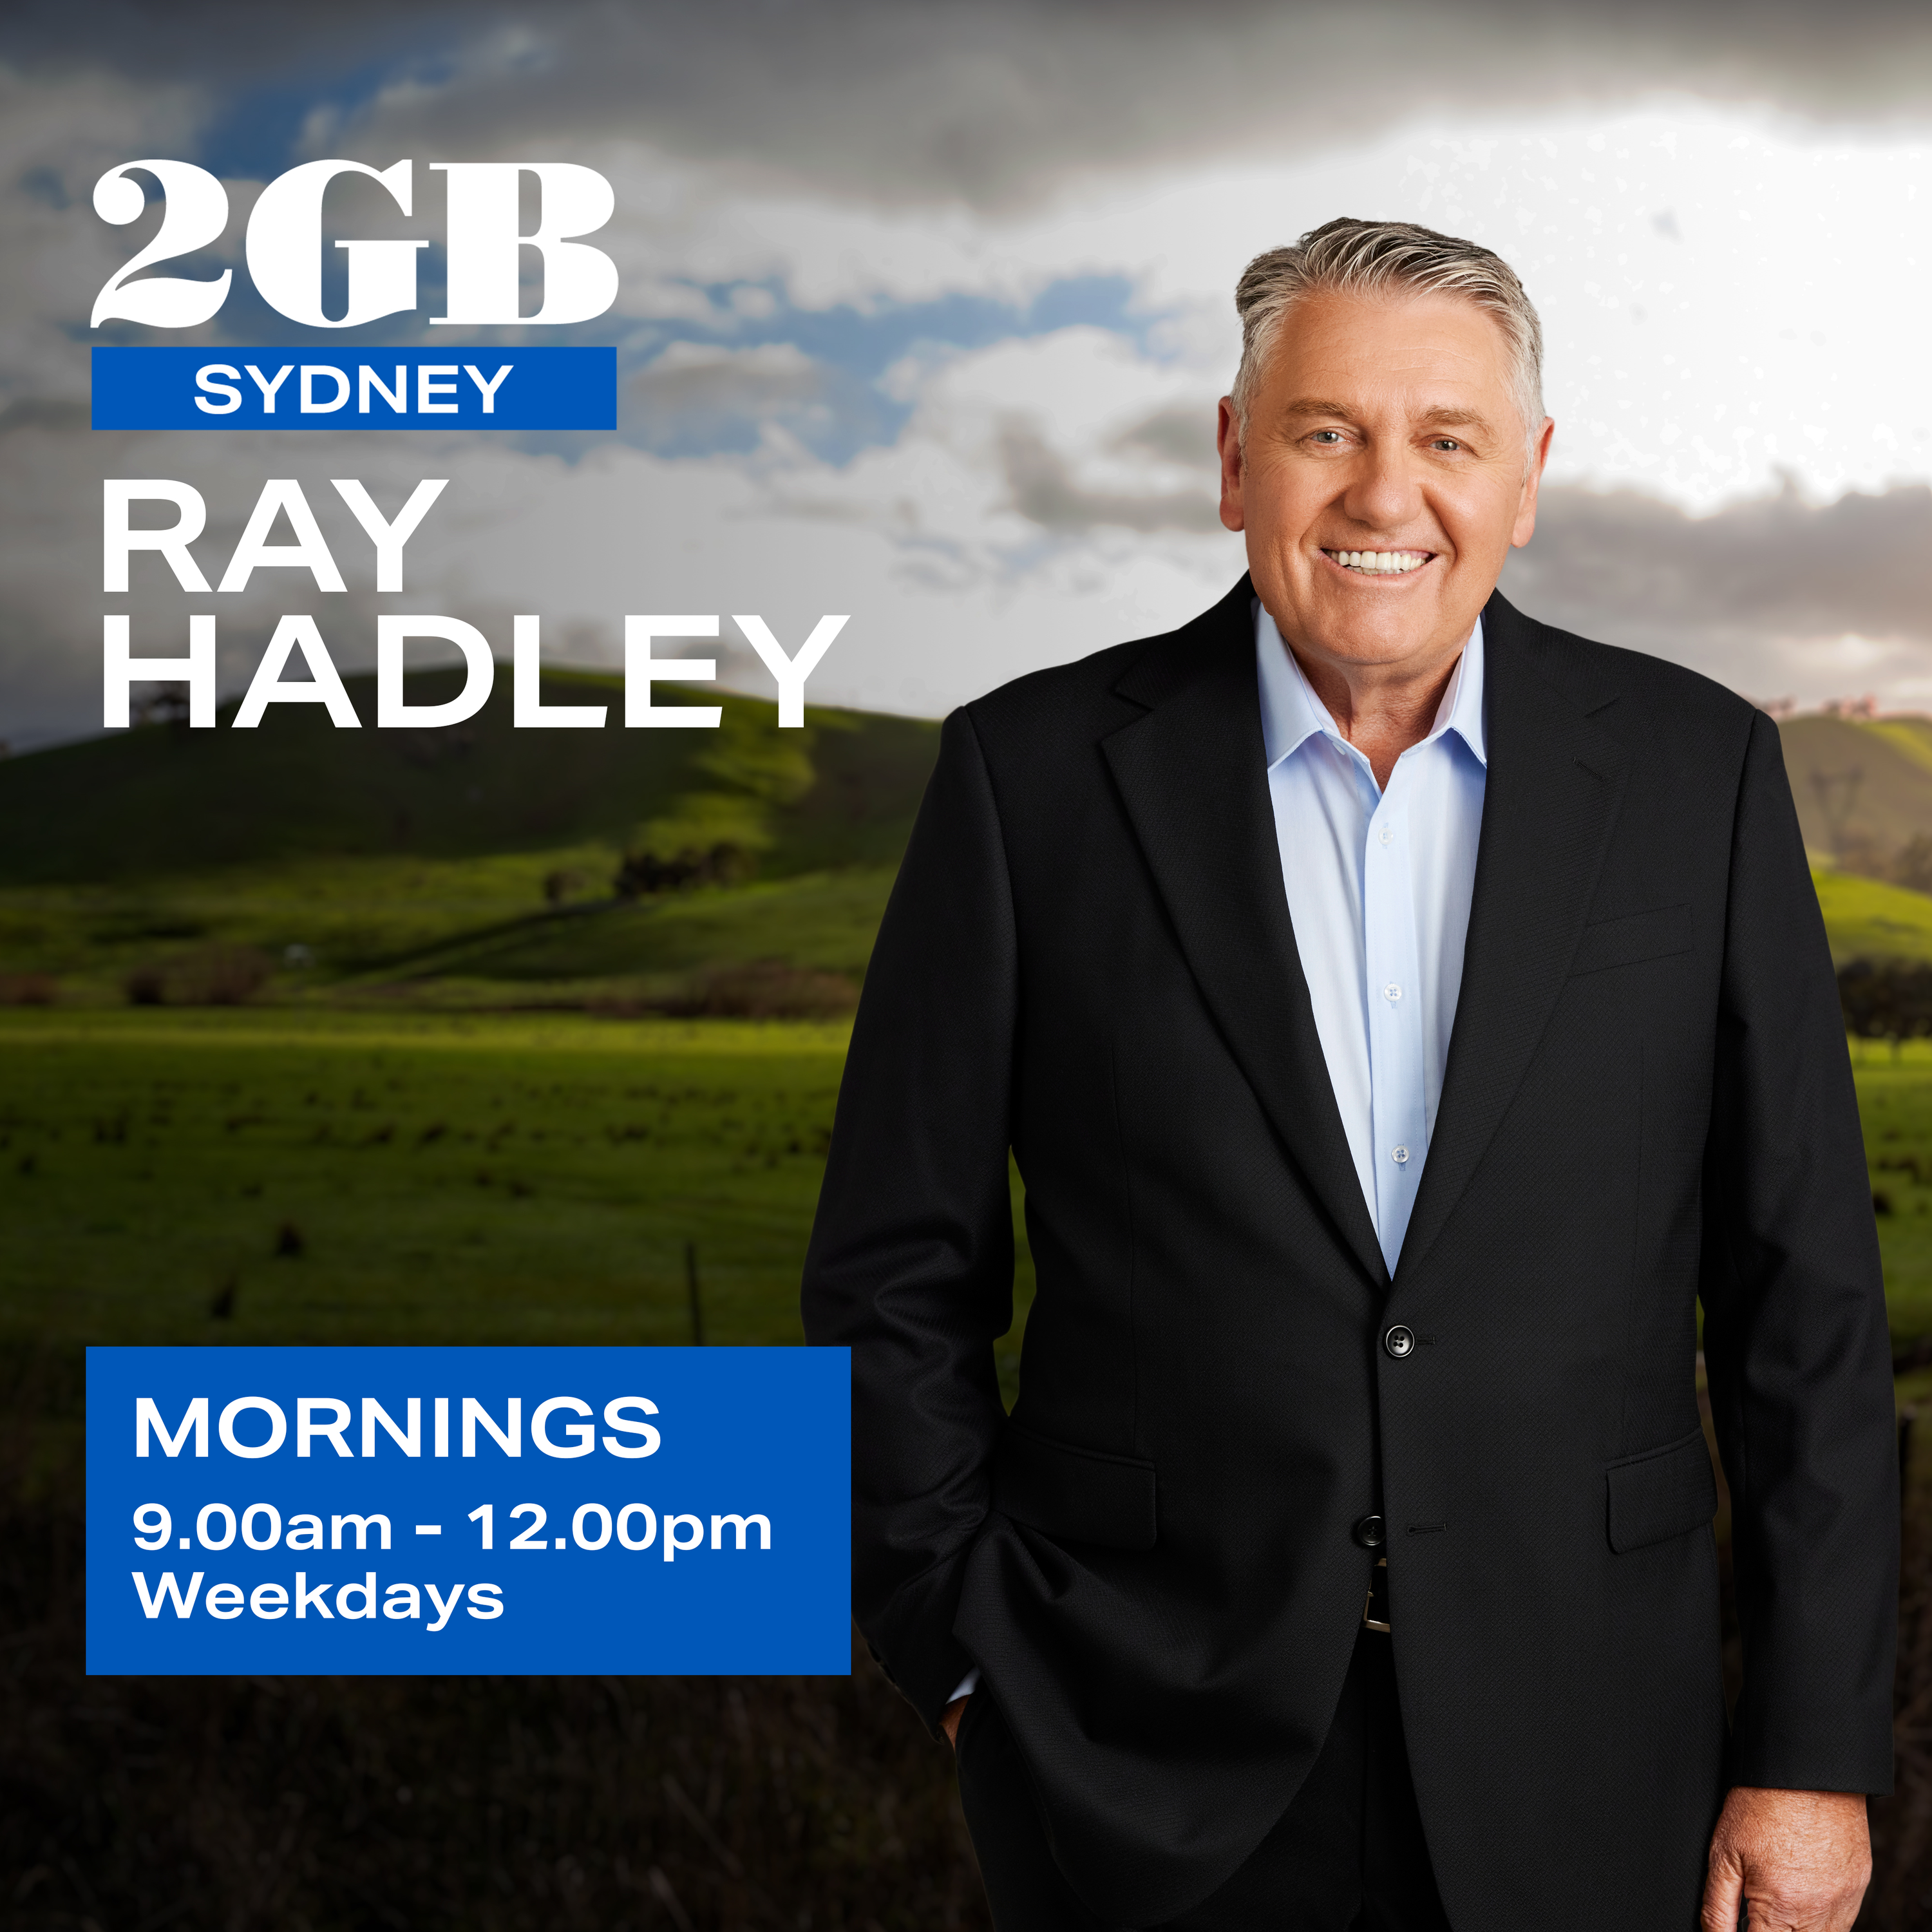 The Great Escape: How Ray Hadley almost missed the last hour of his show